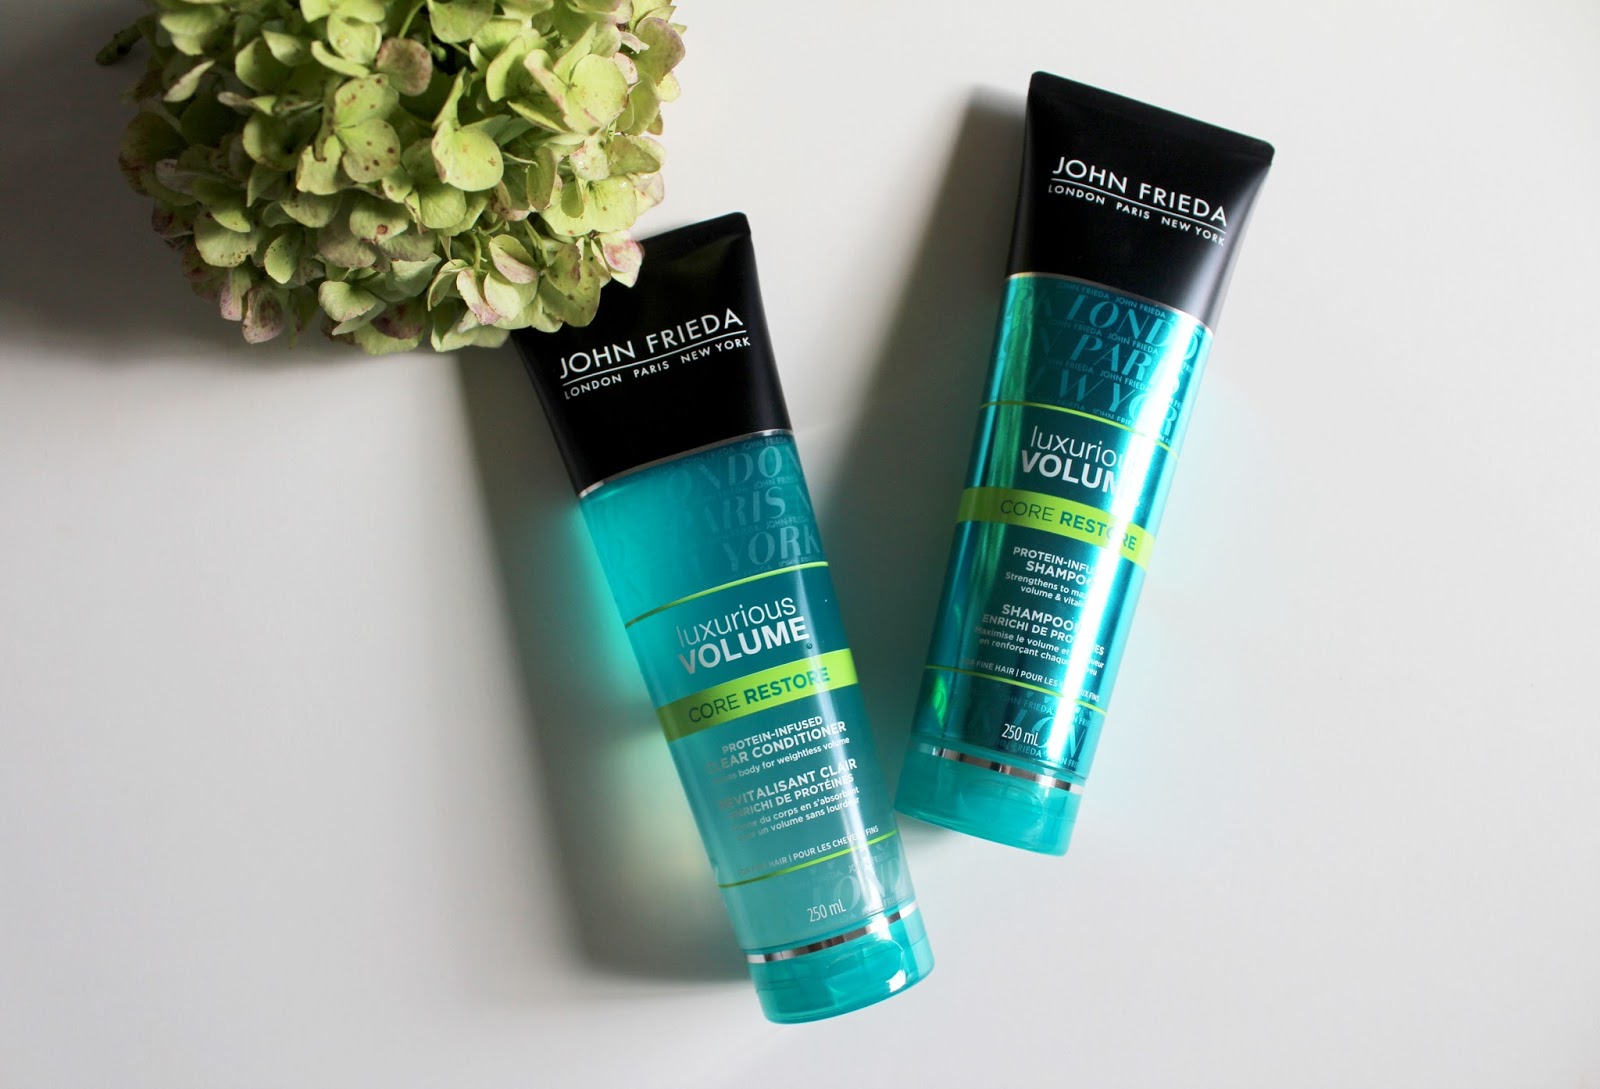 Guinness Springboard Hensigt Review: John Frieda Luxurious Volume Core Restore Shampoo and Conditioner